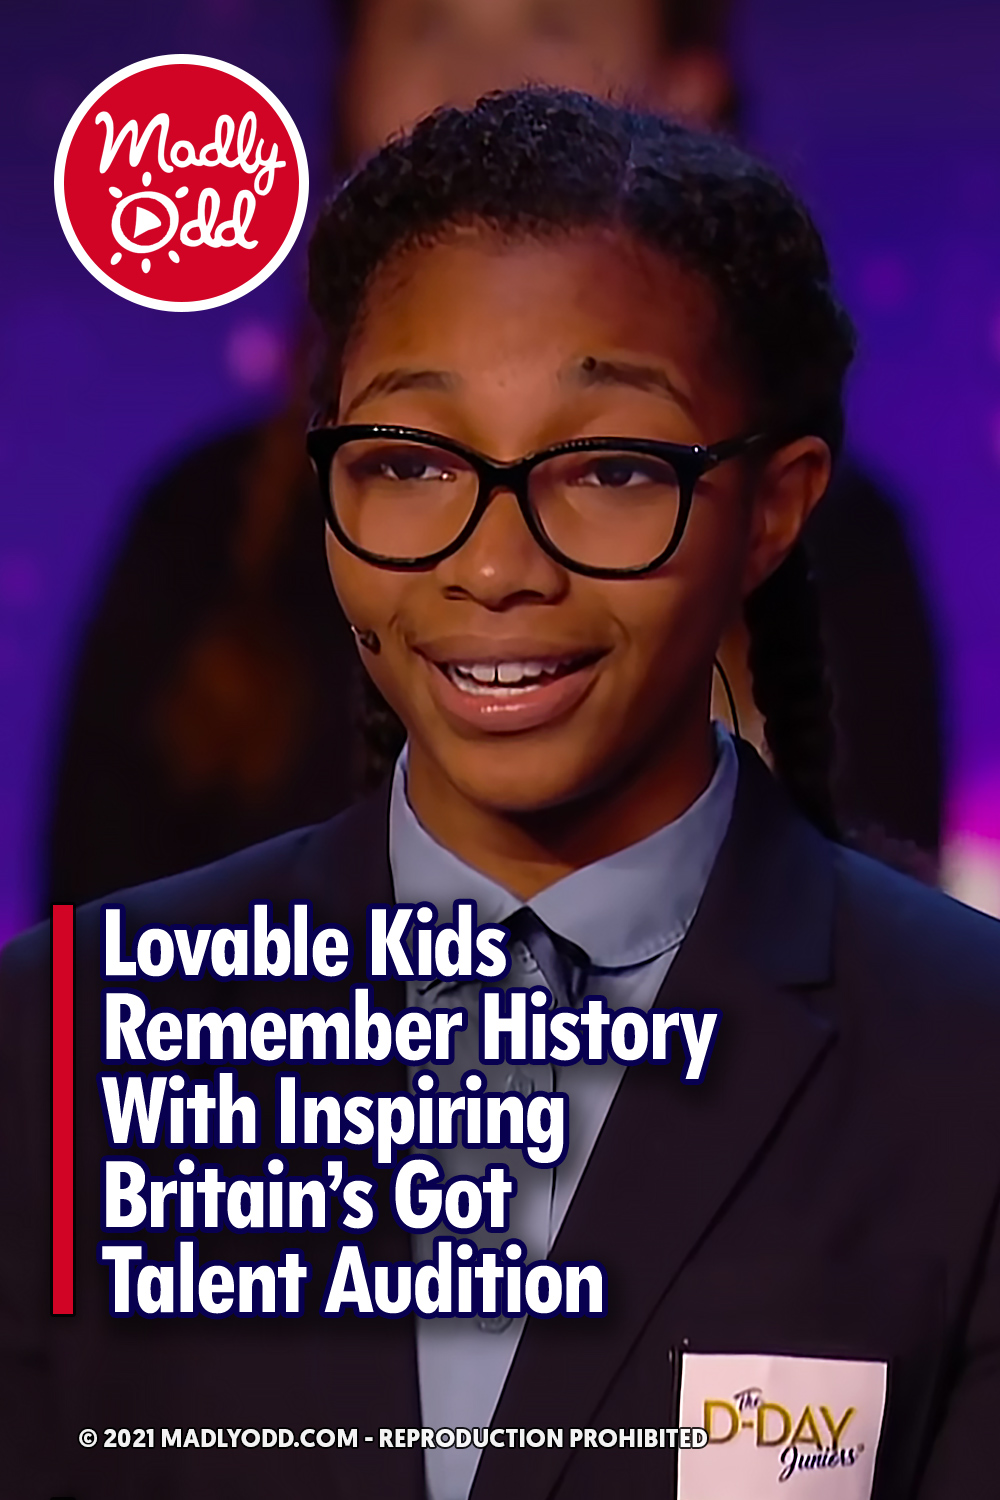 Lovable Kids Remember History With Inspiring Britain’s Got Talent Audition